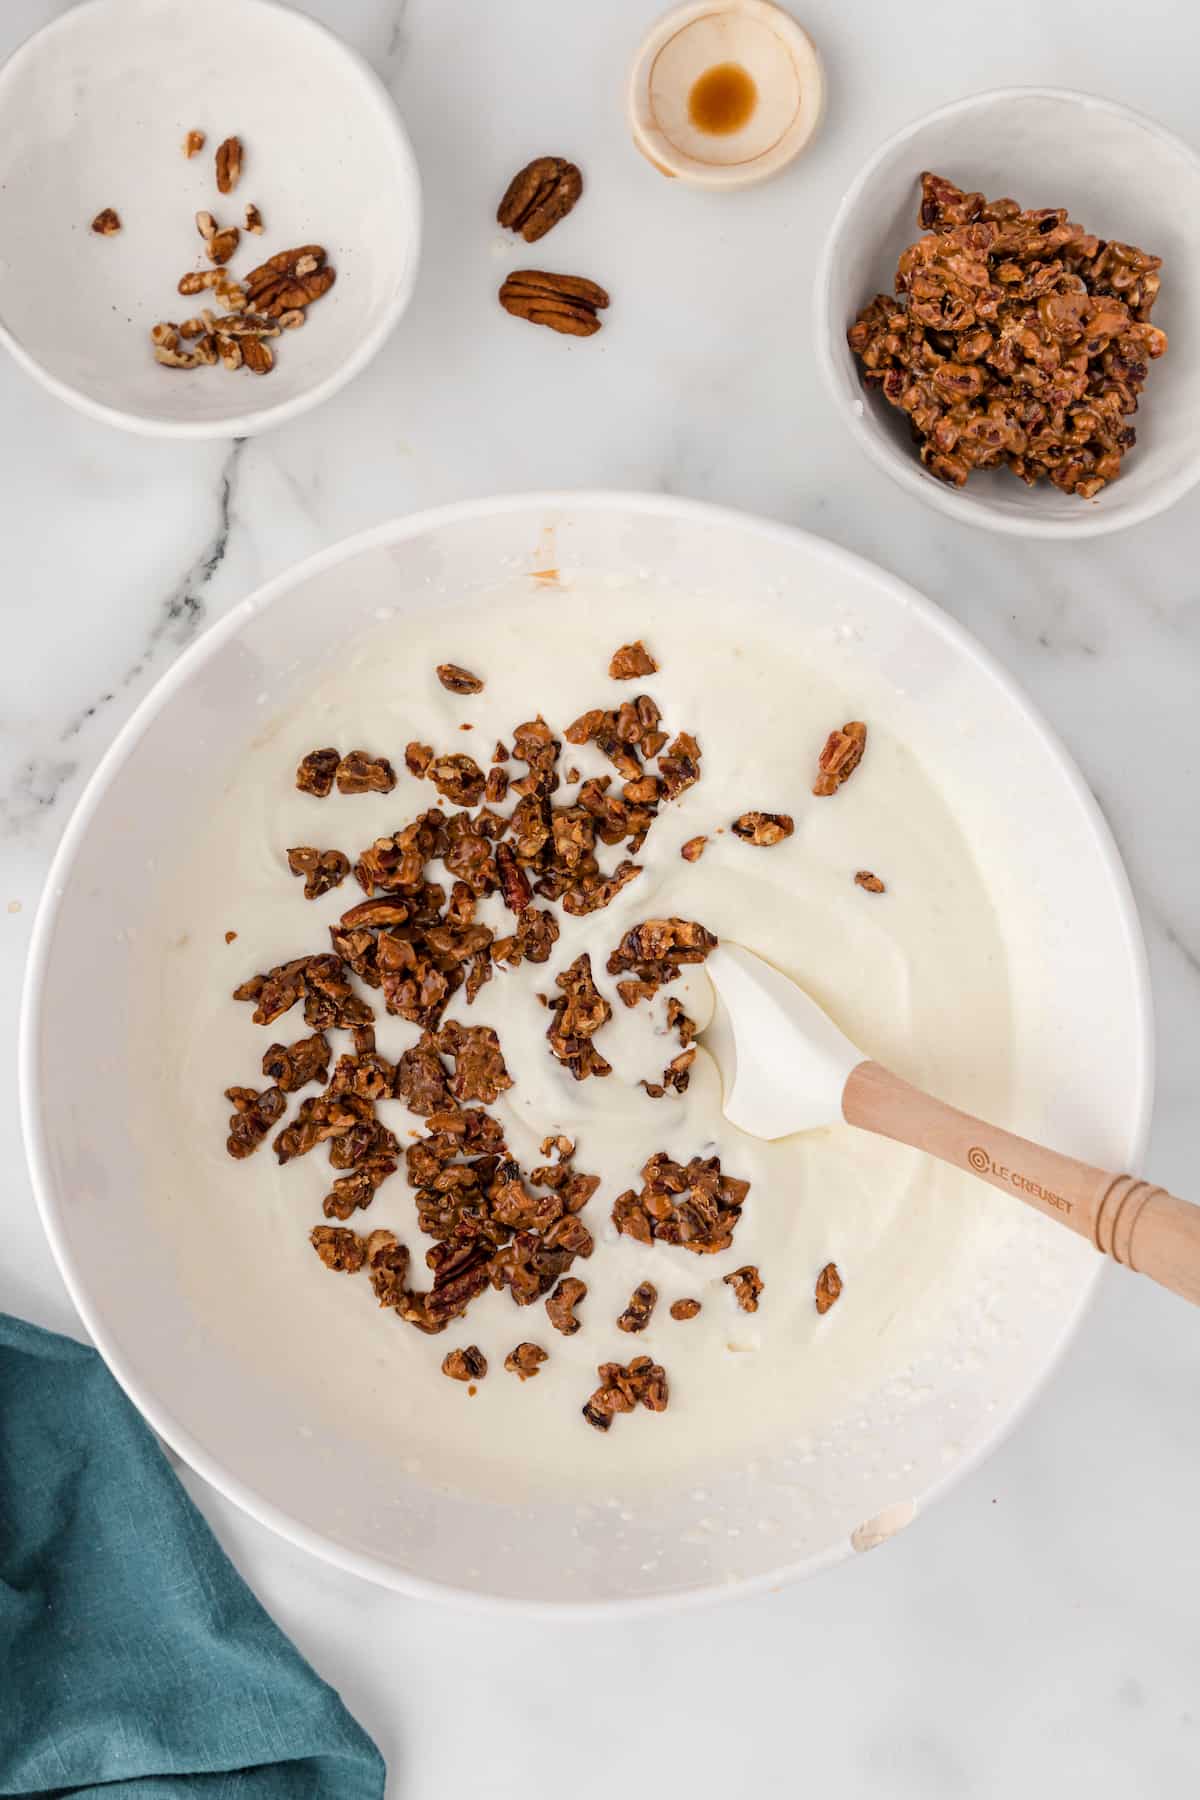 mix in the buttered pecans with the whipped cream